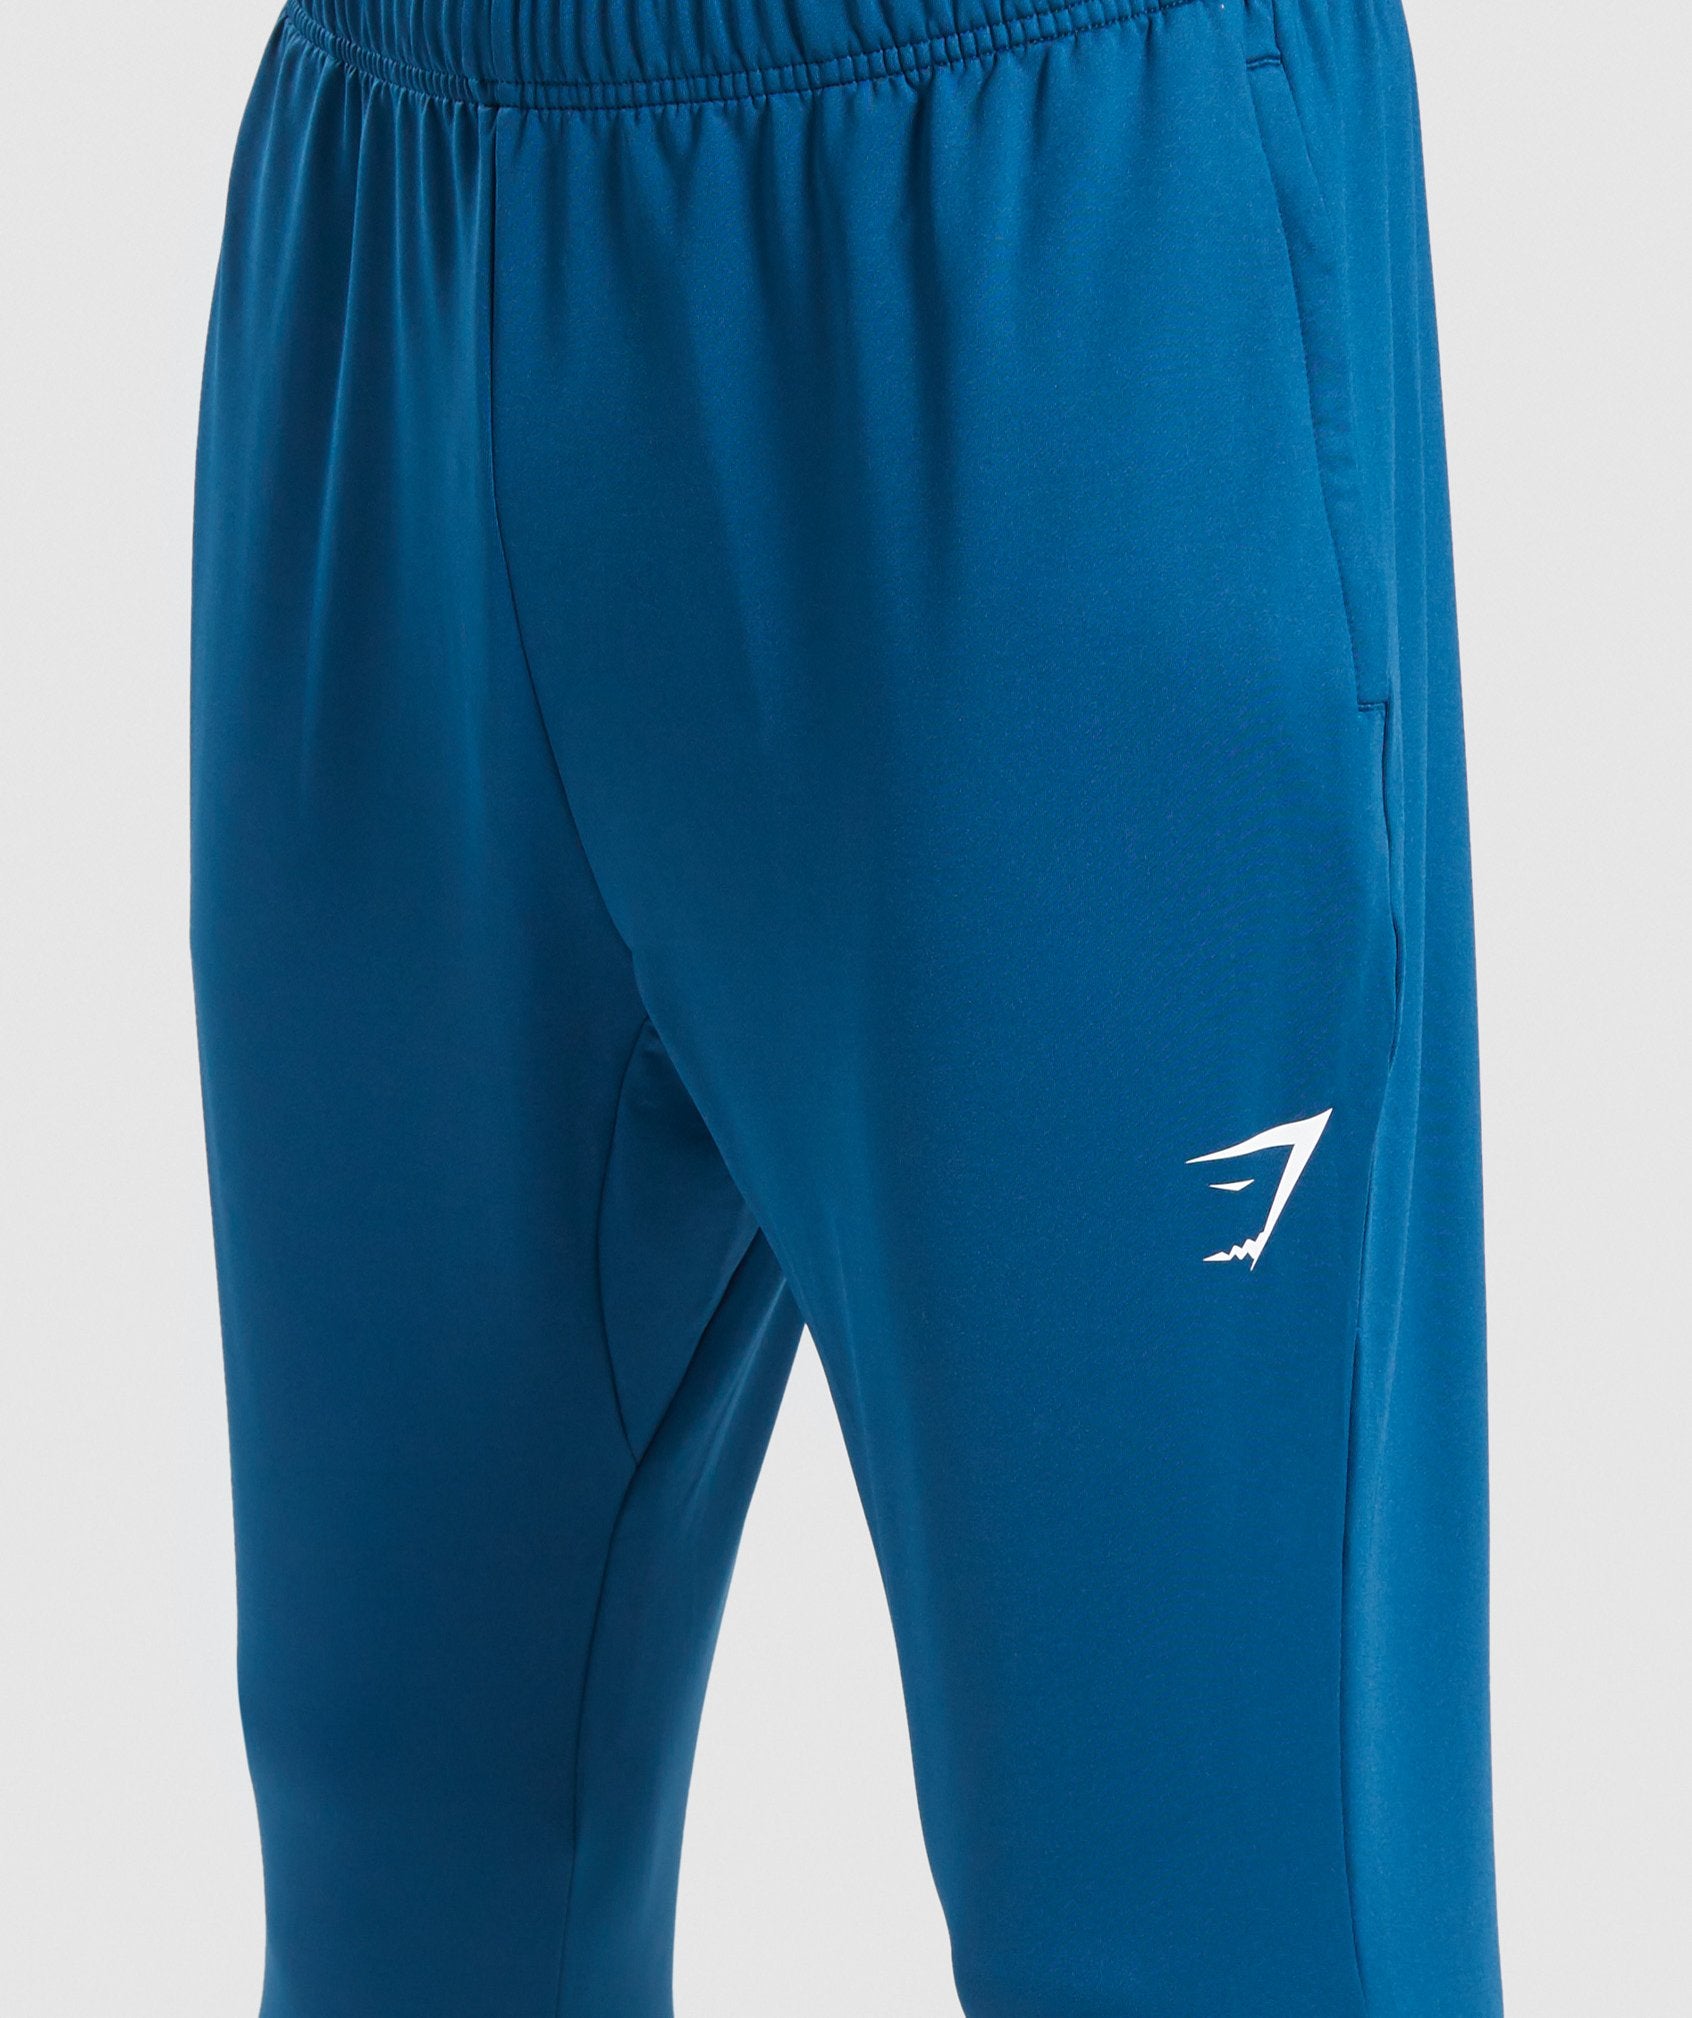 Arrival Joggers in Petrol Blue